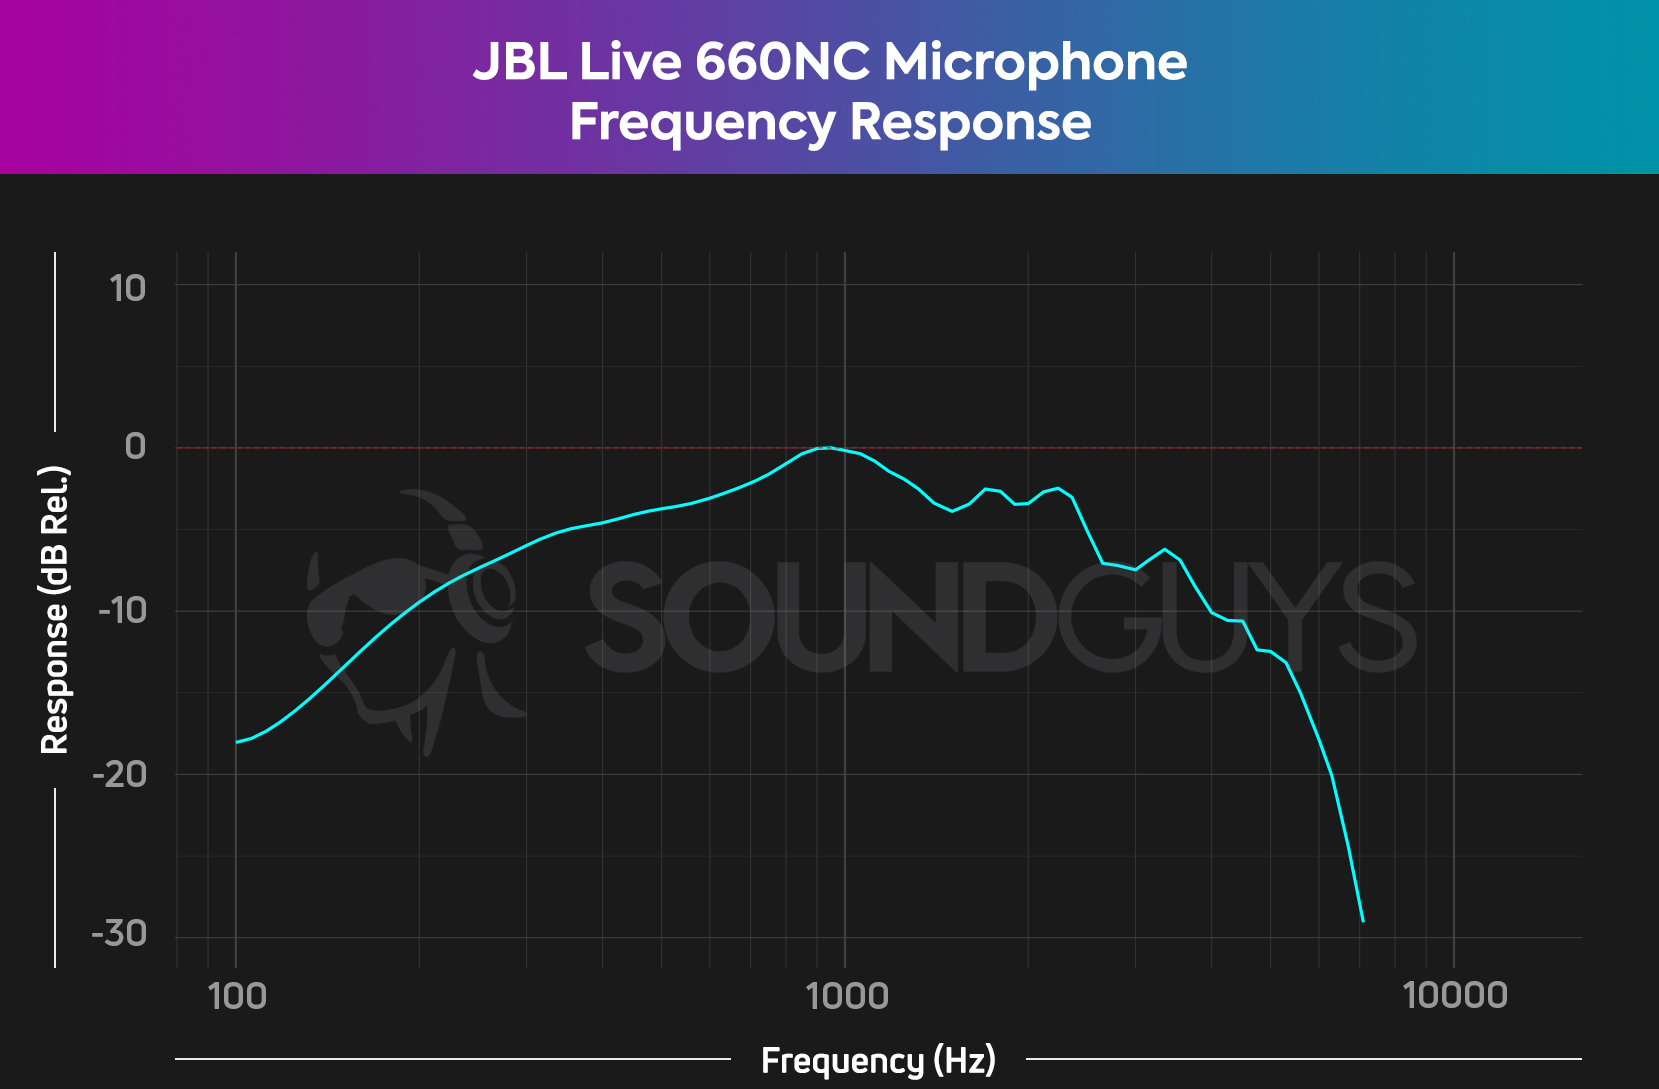 A frequency response for the JBL Live 660NC microphone, which has a pronounced rolloff in the lows and highs